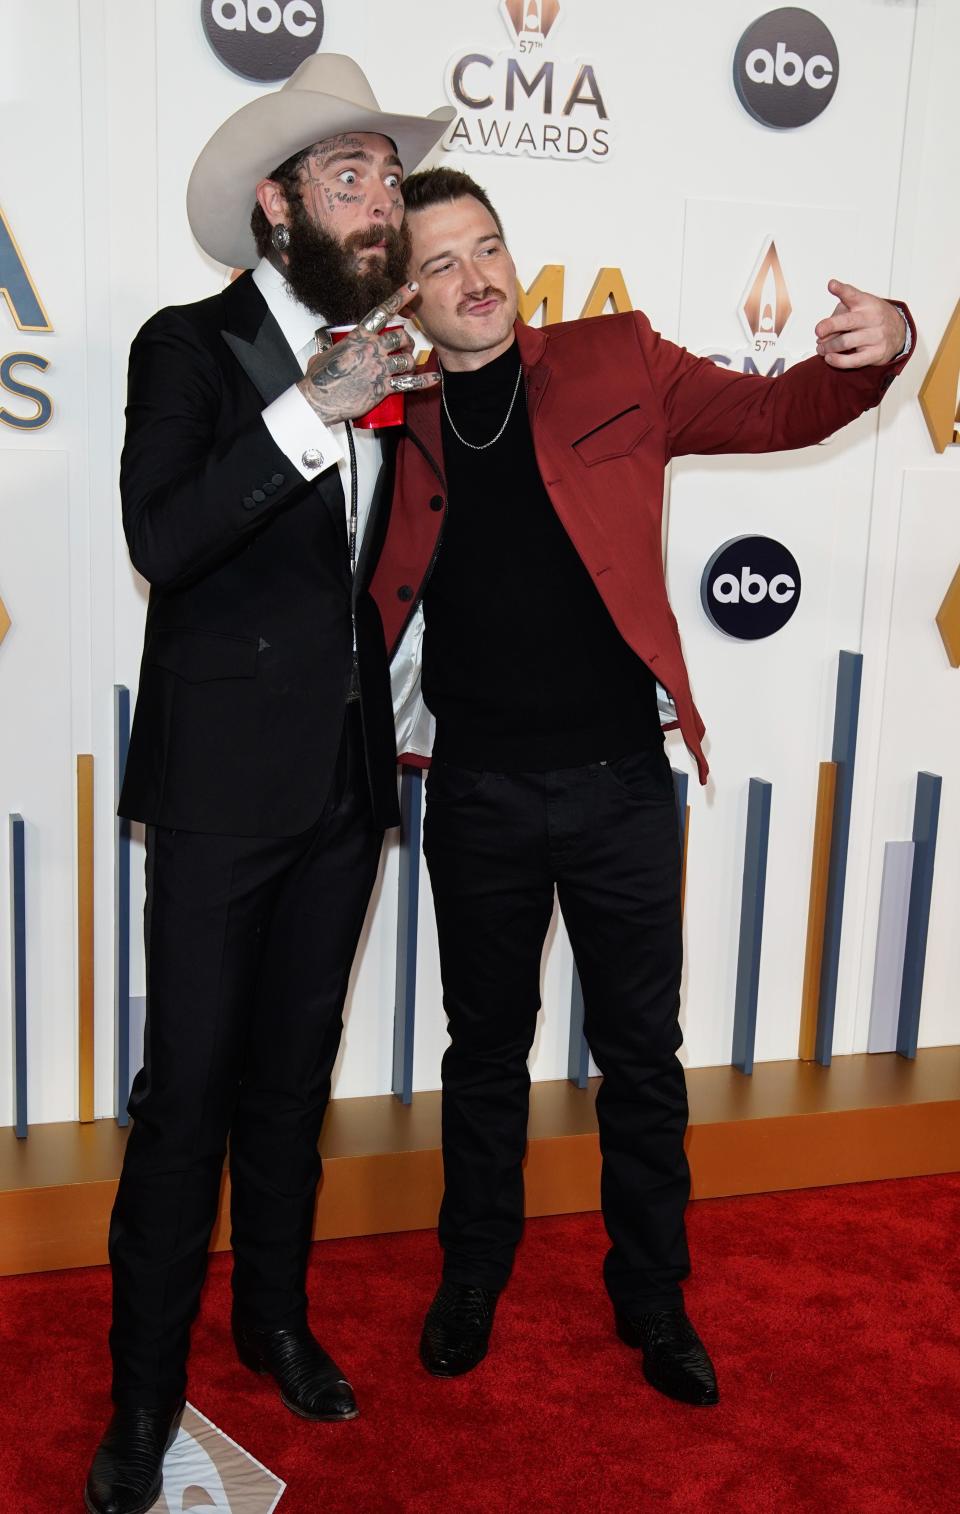 In November, Malone (left) and Wallen appeared together on the red carpet at the 57th annual Country Music Association Awards in Nashville, Tennessee.